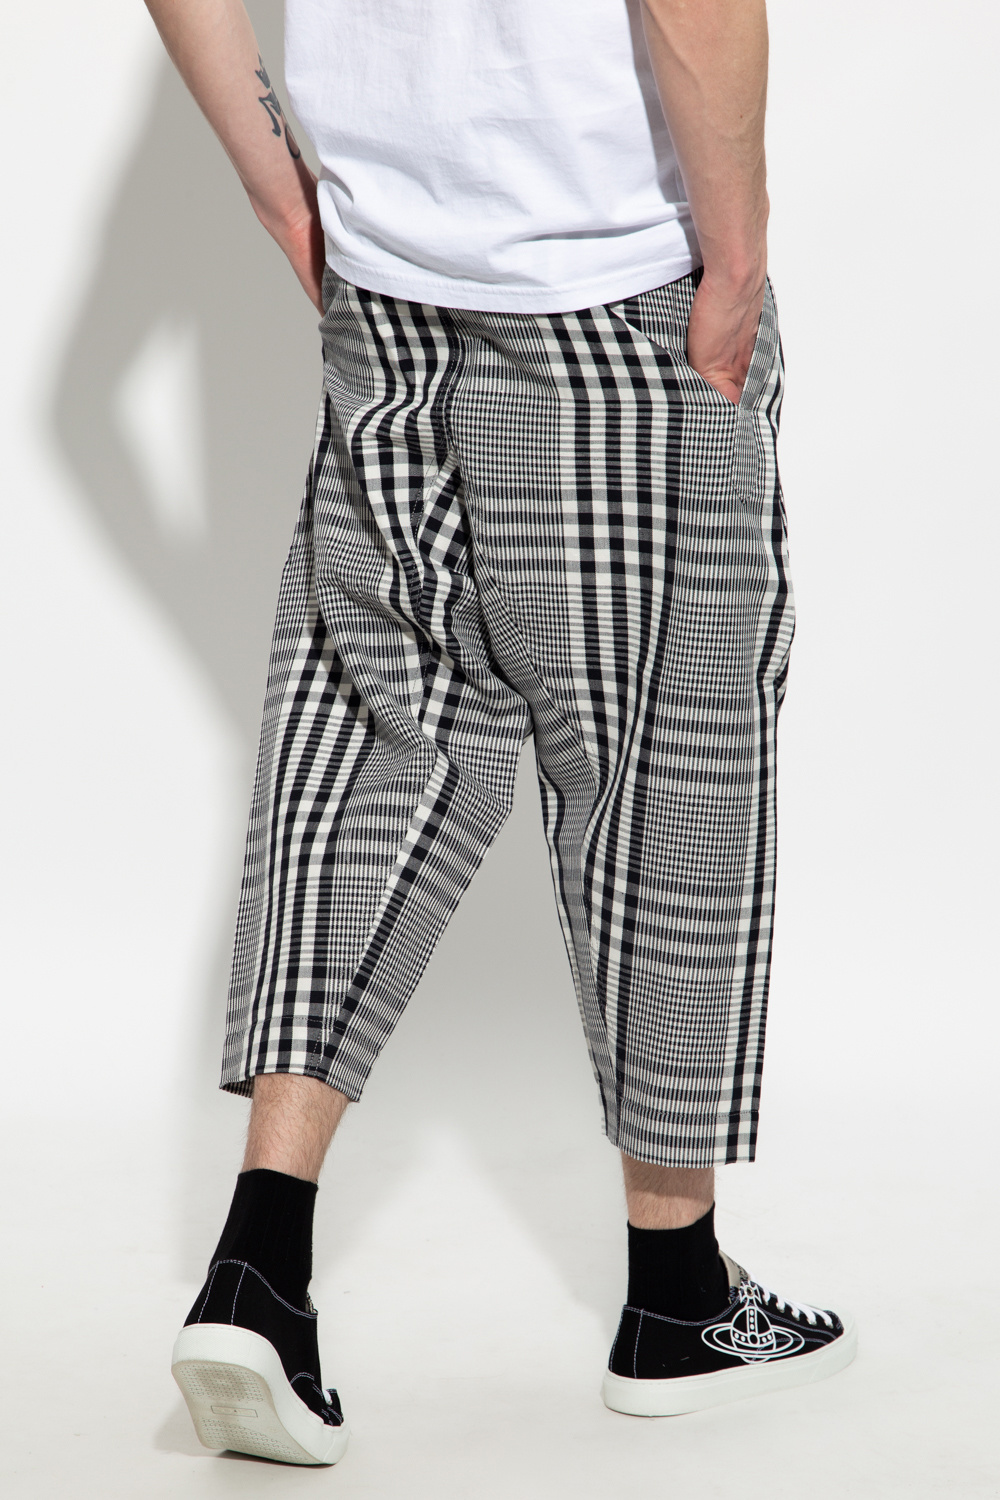 Vivienne Westwood Relaxed-fitting vintage trousers